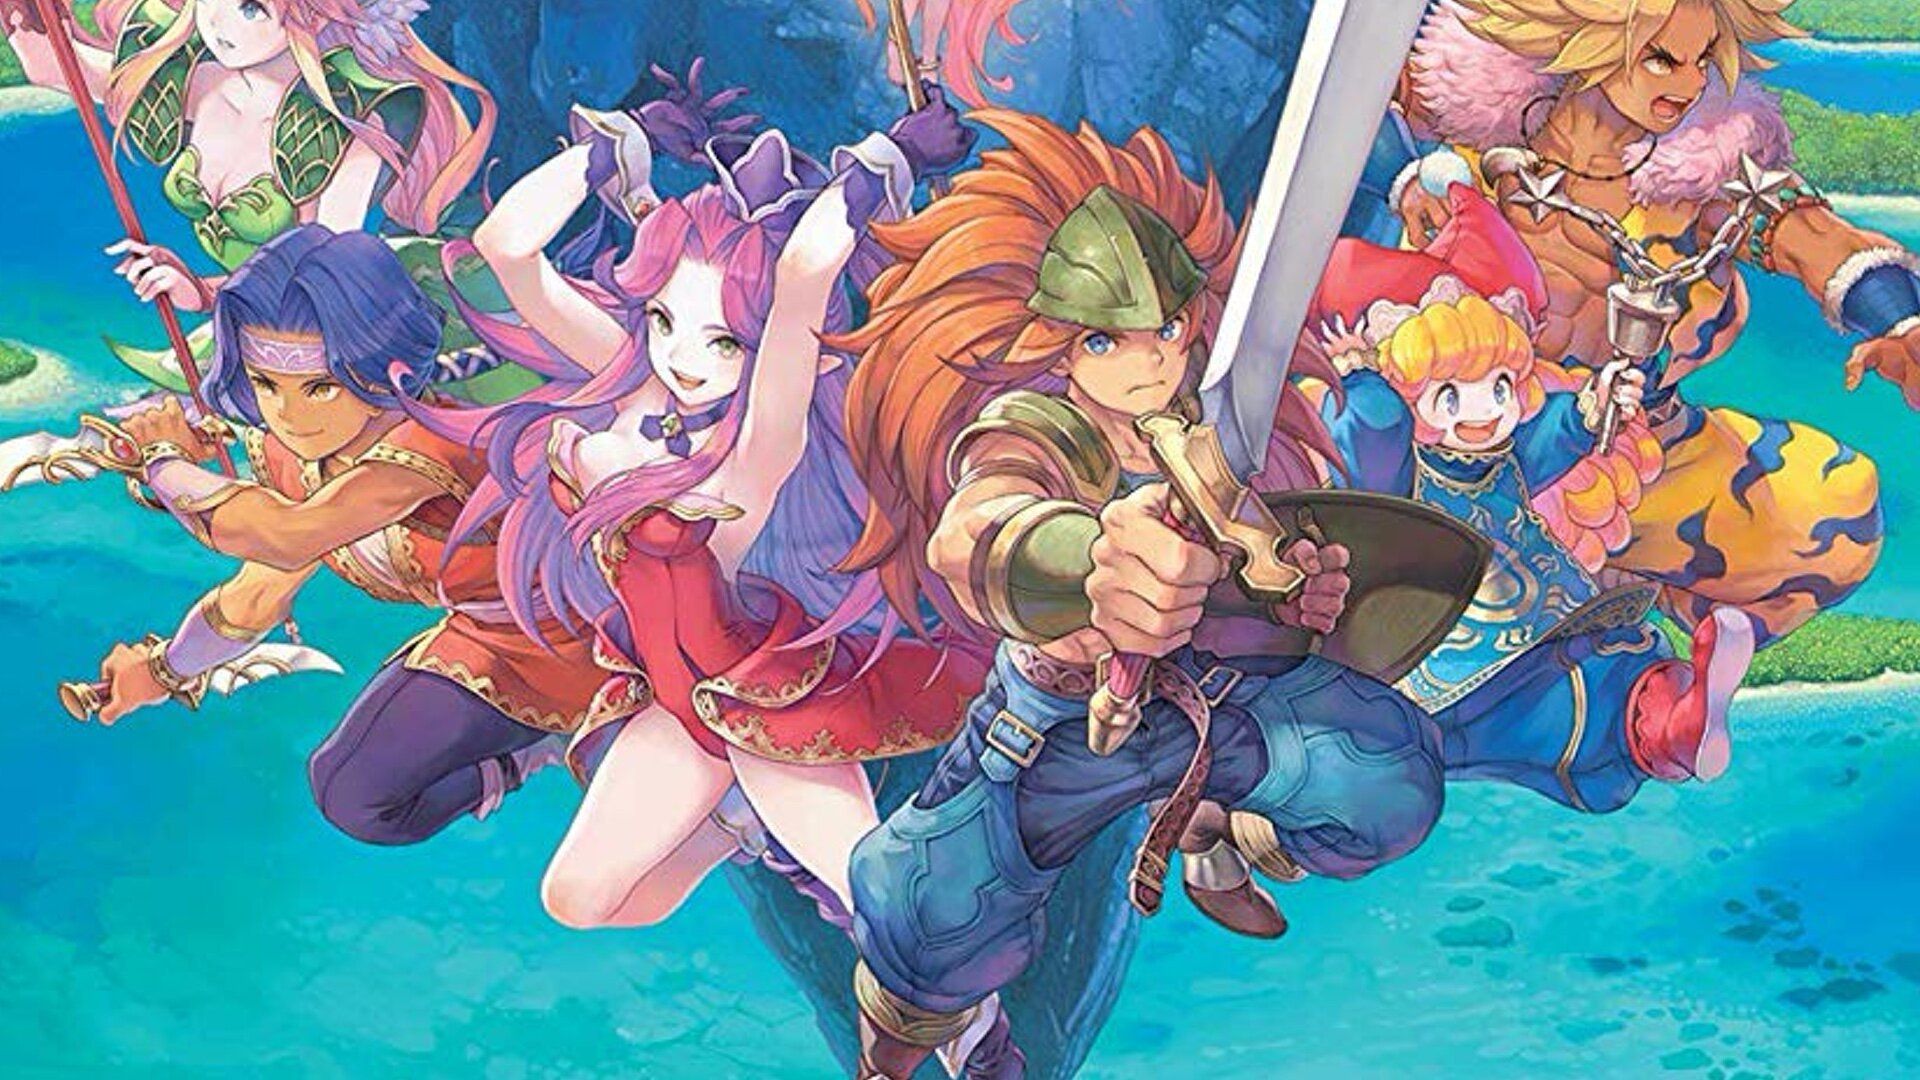 Trials of Mana Demo Looks Set for PS4 Ahead of April Release Date